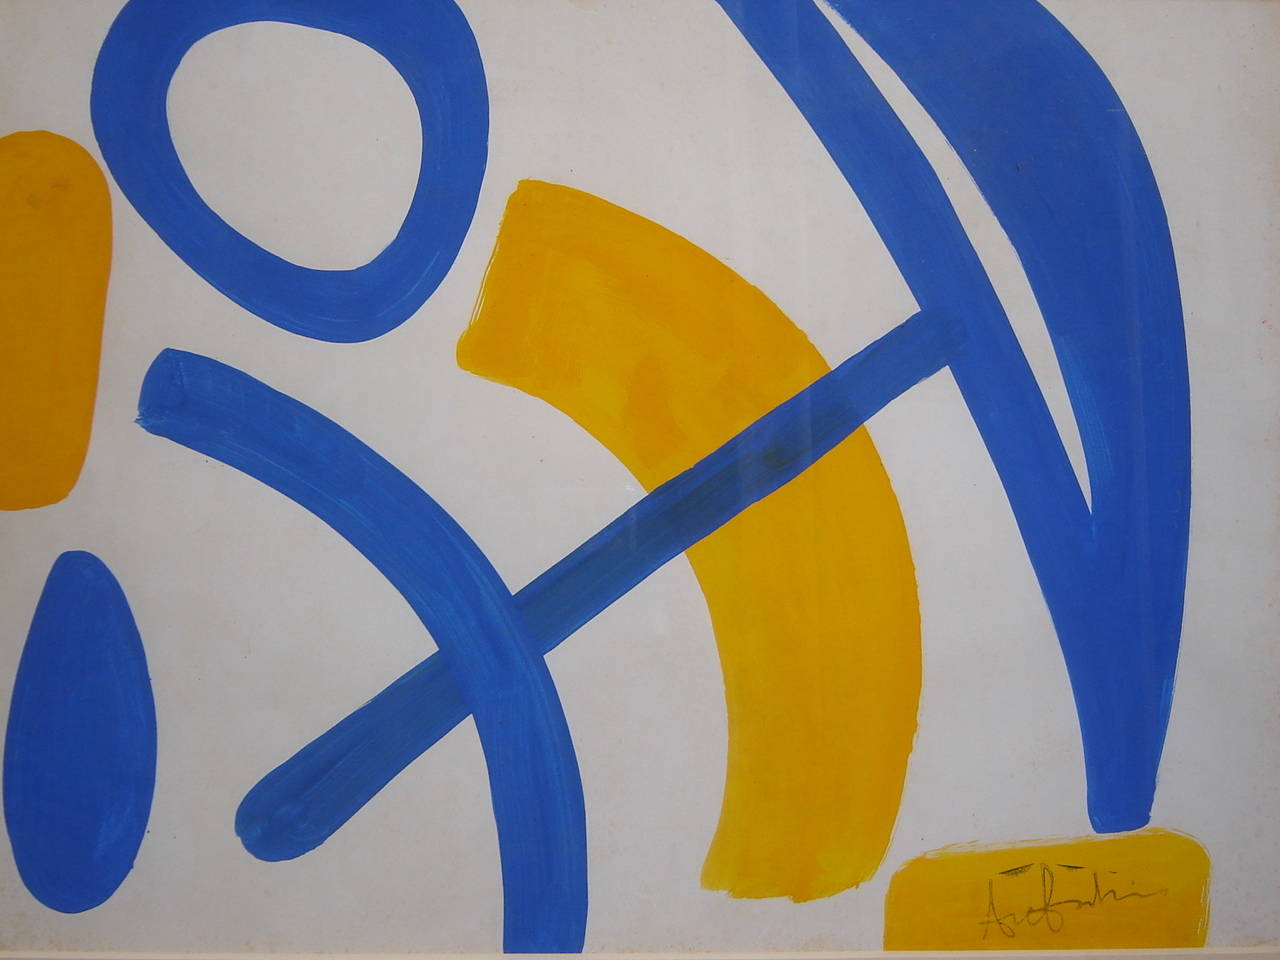 Blue and yellow gouache composition by Ange Falchi, incredible 20th artist (1913-1997). See attached photos with biography.